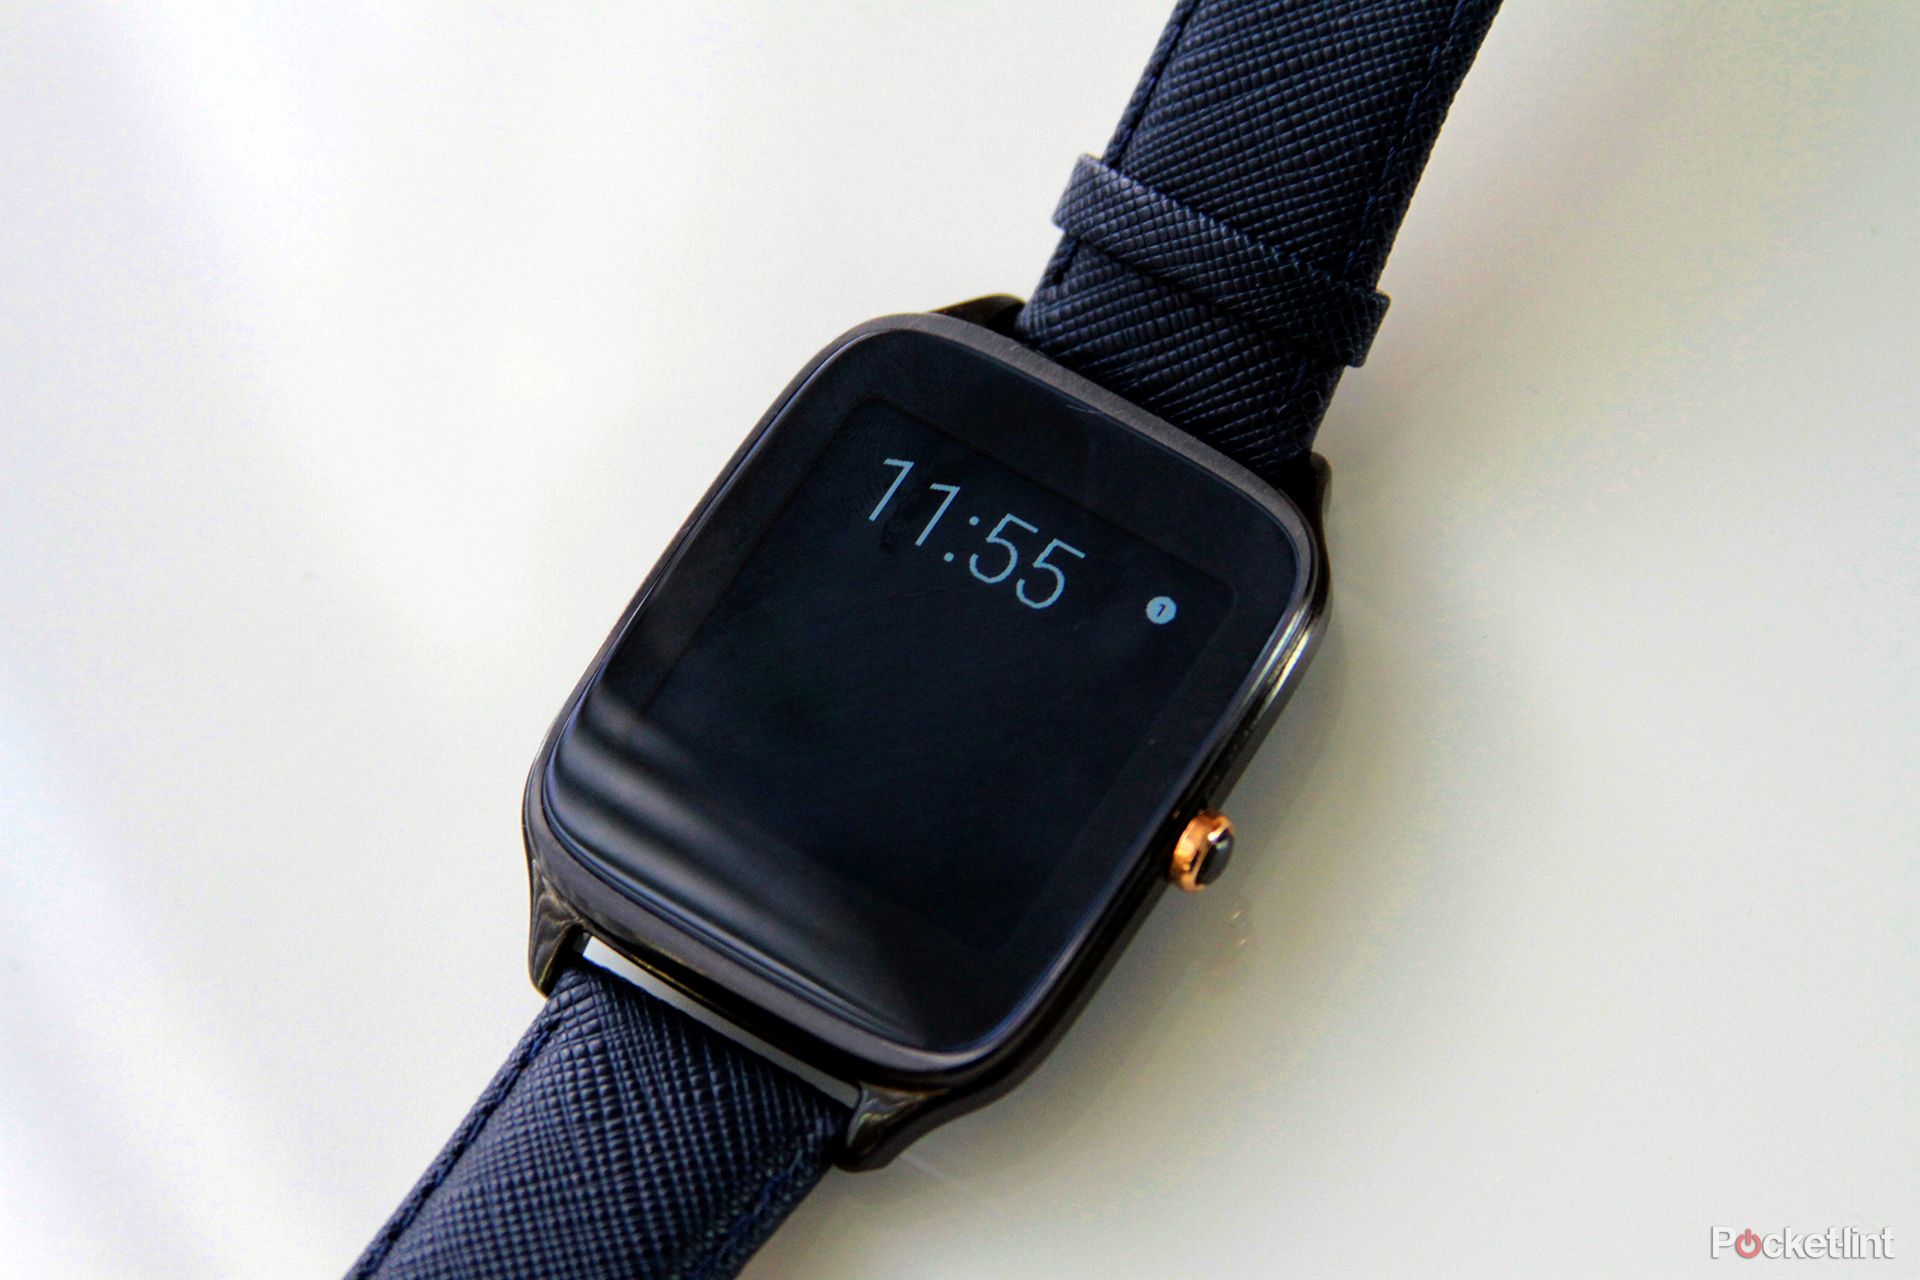 asus zenwatch 2 review image 1